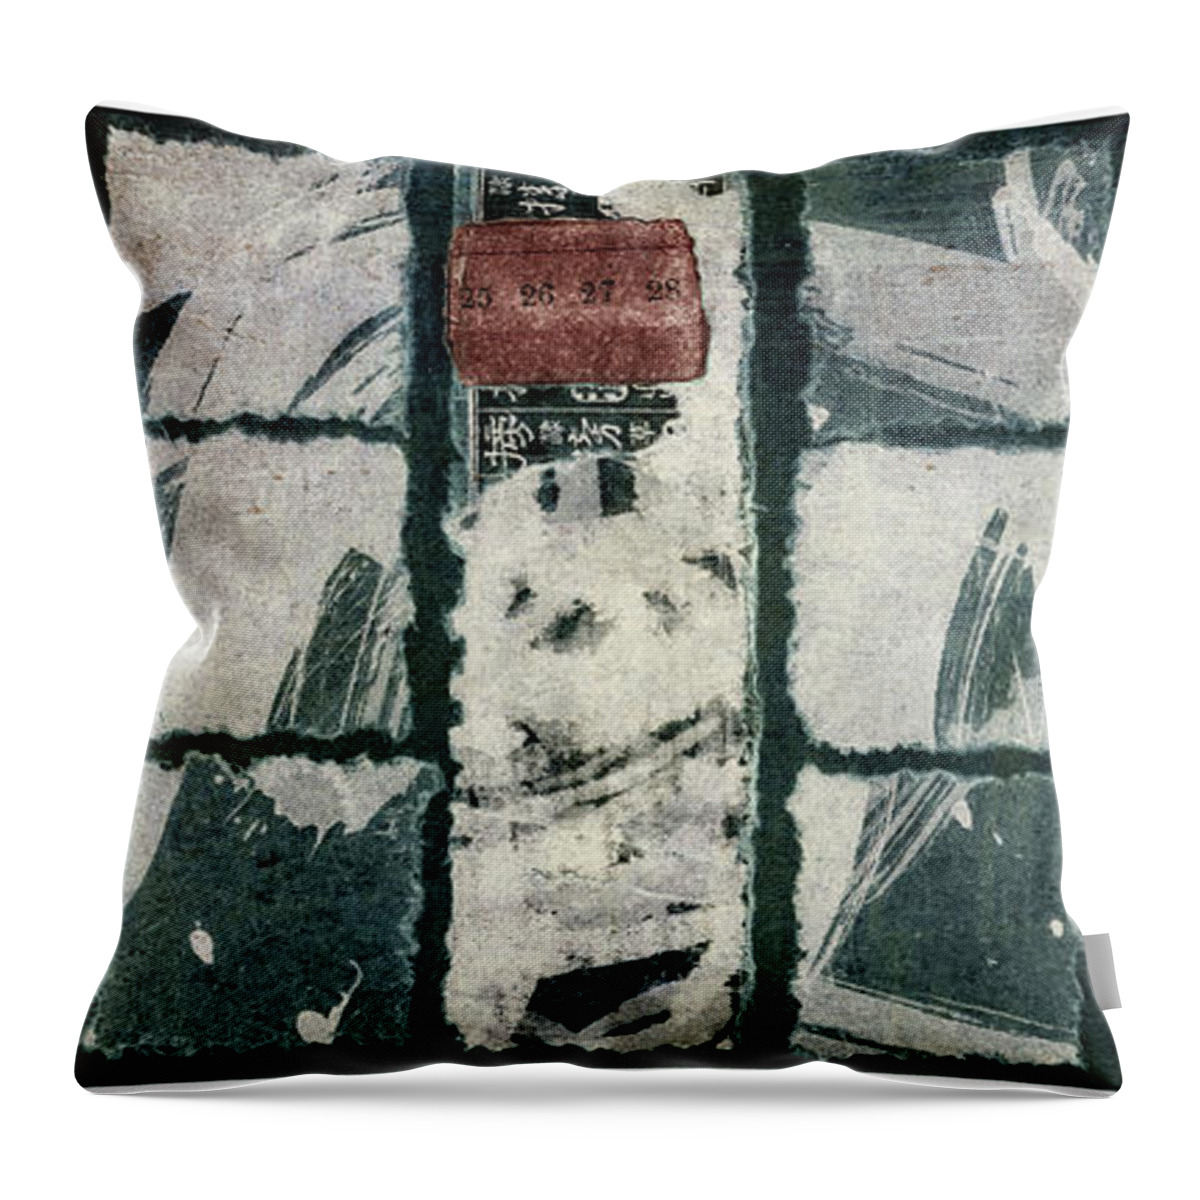 Squares Throw Pillow featuring the mixed media Torn Squares Collage by Carol Leigh